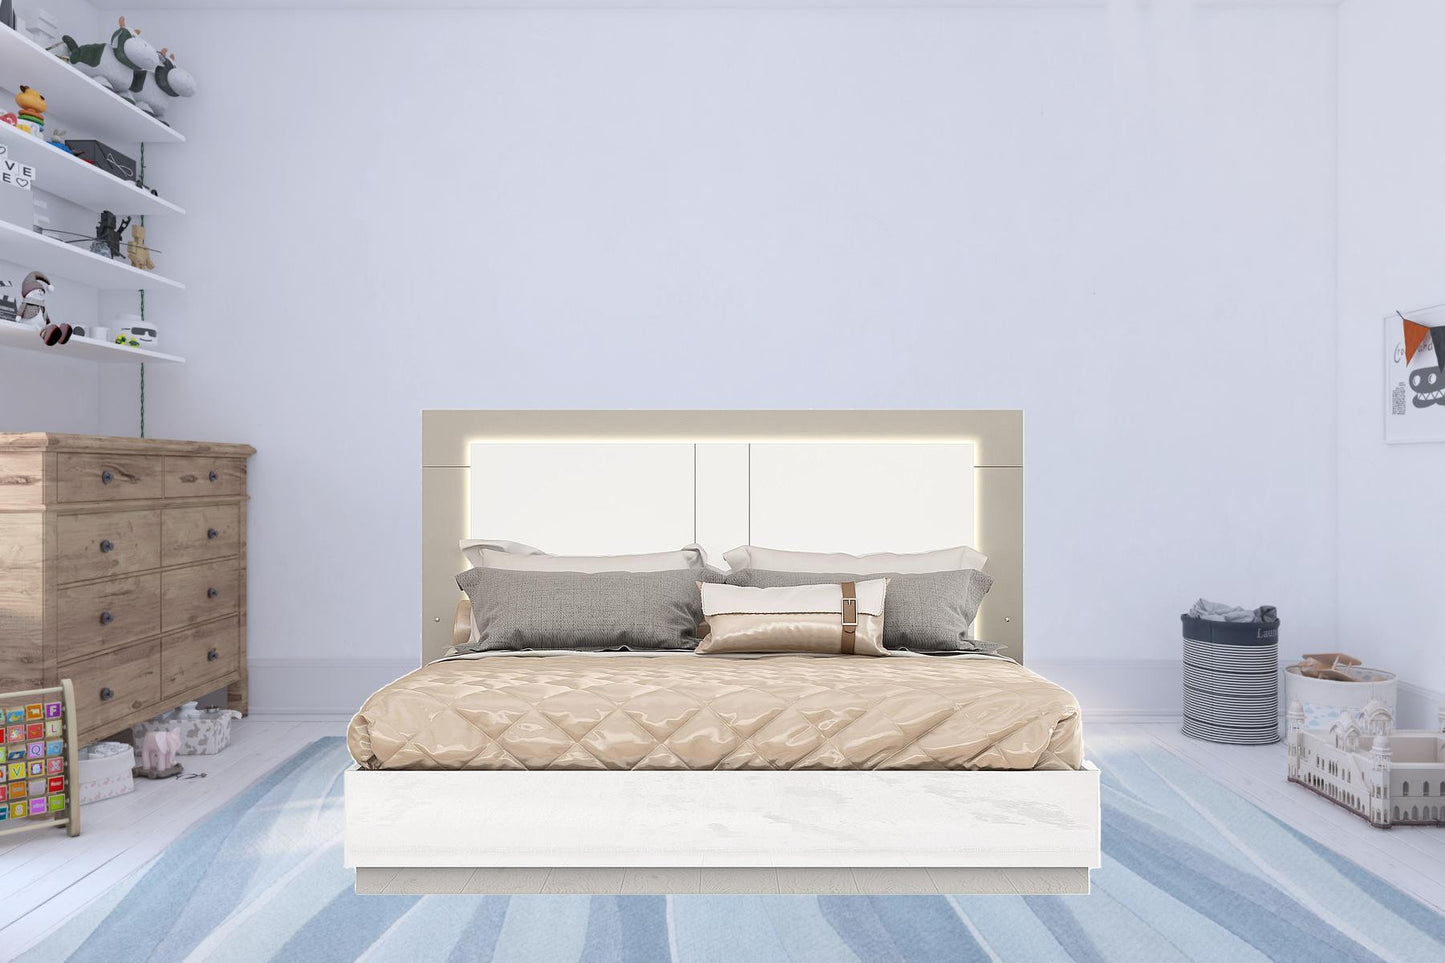 King White High Gloss Bed Frame with LED Headboard